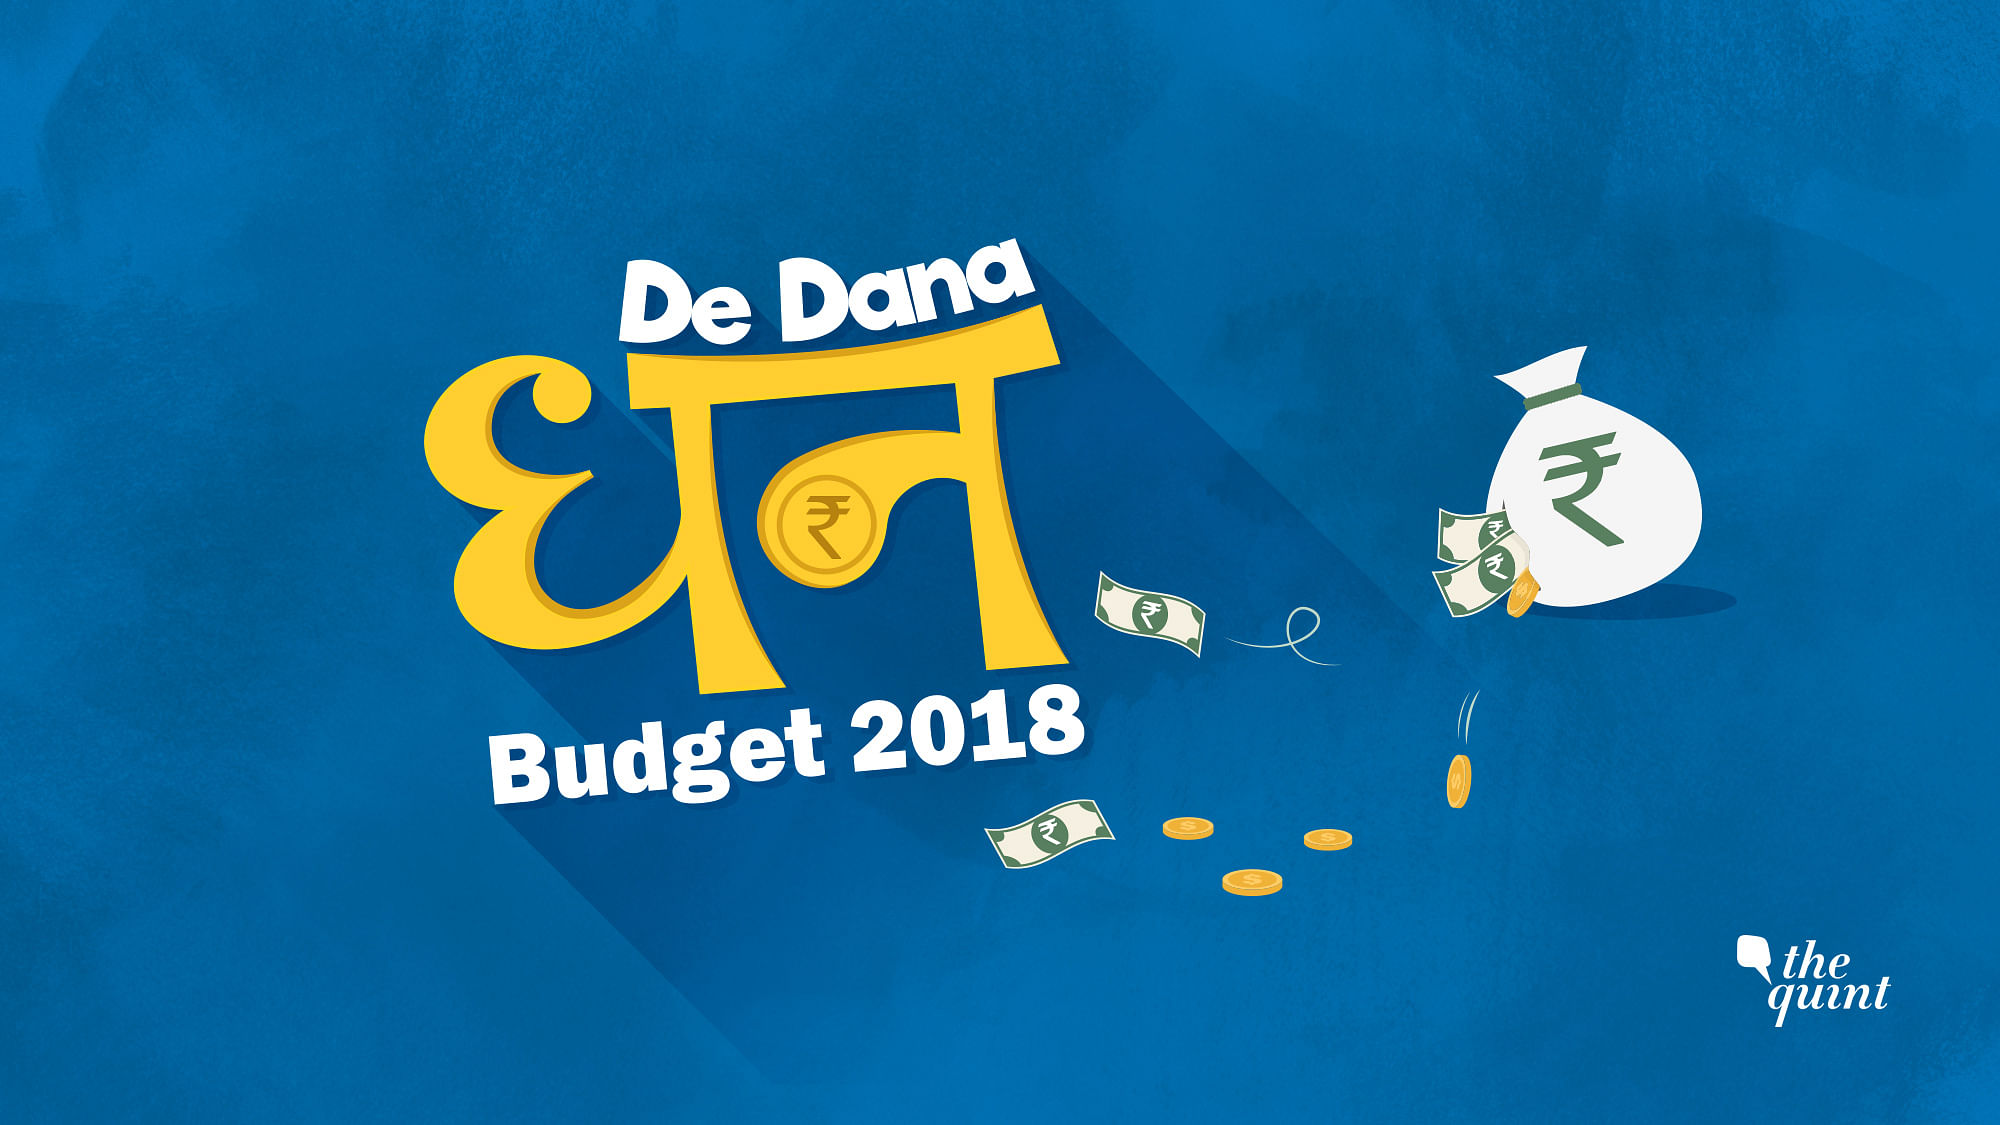 Finance Minister Arun Jaitley will present budget for the financial year 2018-19 on 1 February in the Parliament.